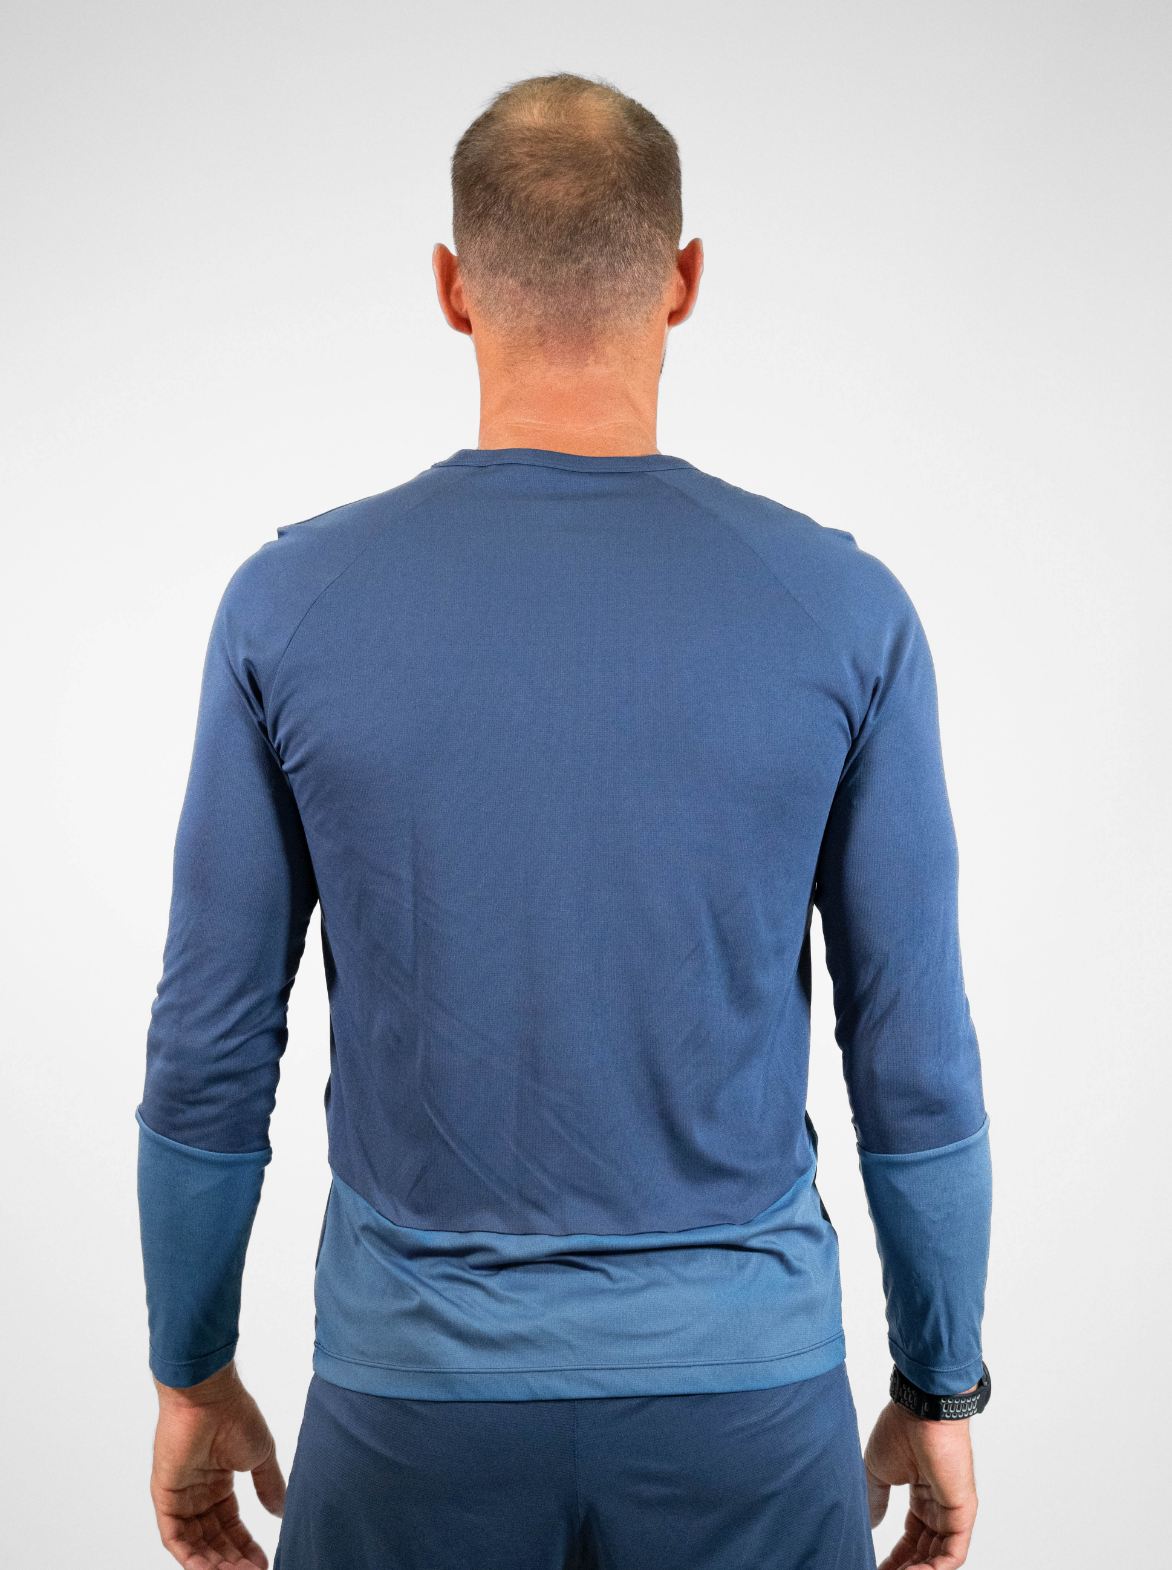 T-Shirt manches longues Running Homme Made in France et Recyclé - TOULON - Ventes privées